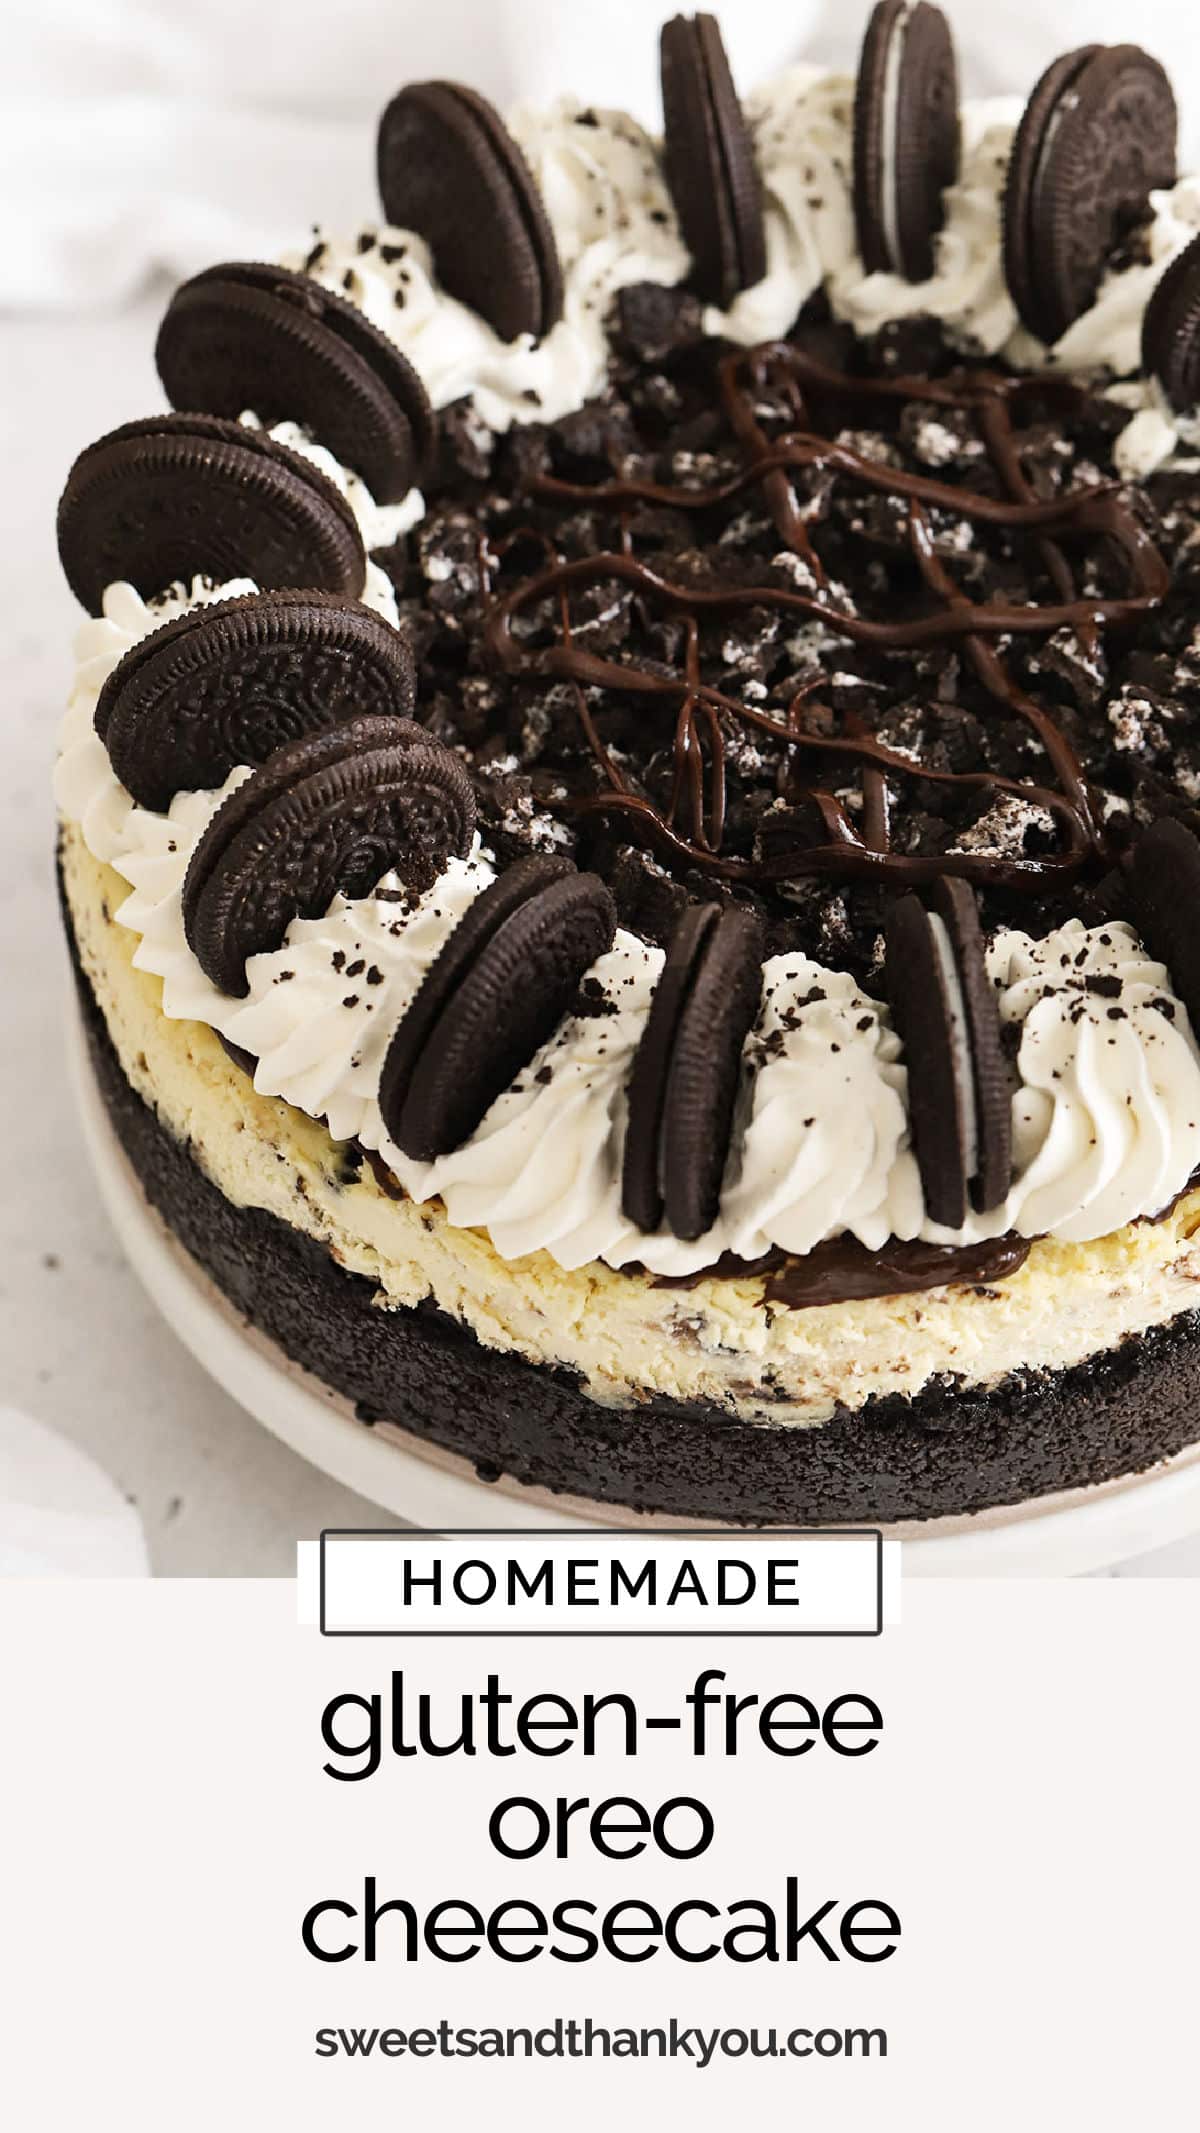 Our Gluten-Free Oreo Cheesecake recipe is a DREAM dessert for cookies & cream lovers! It's packed with with Oreo cookie flavor in every layer! / gluten-free oreo dessert recipes / gluten-free thanksgiving dessert / gluten-free cheesecake recipe / gluten-free holiday dessert / gluten-free birthday cake / gluten-free cake / gluten-free pie / the best oreo cheesecake recipe / easy oreo cheesecake recipe / gluten-free oreo cheesecake crust